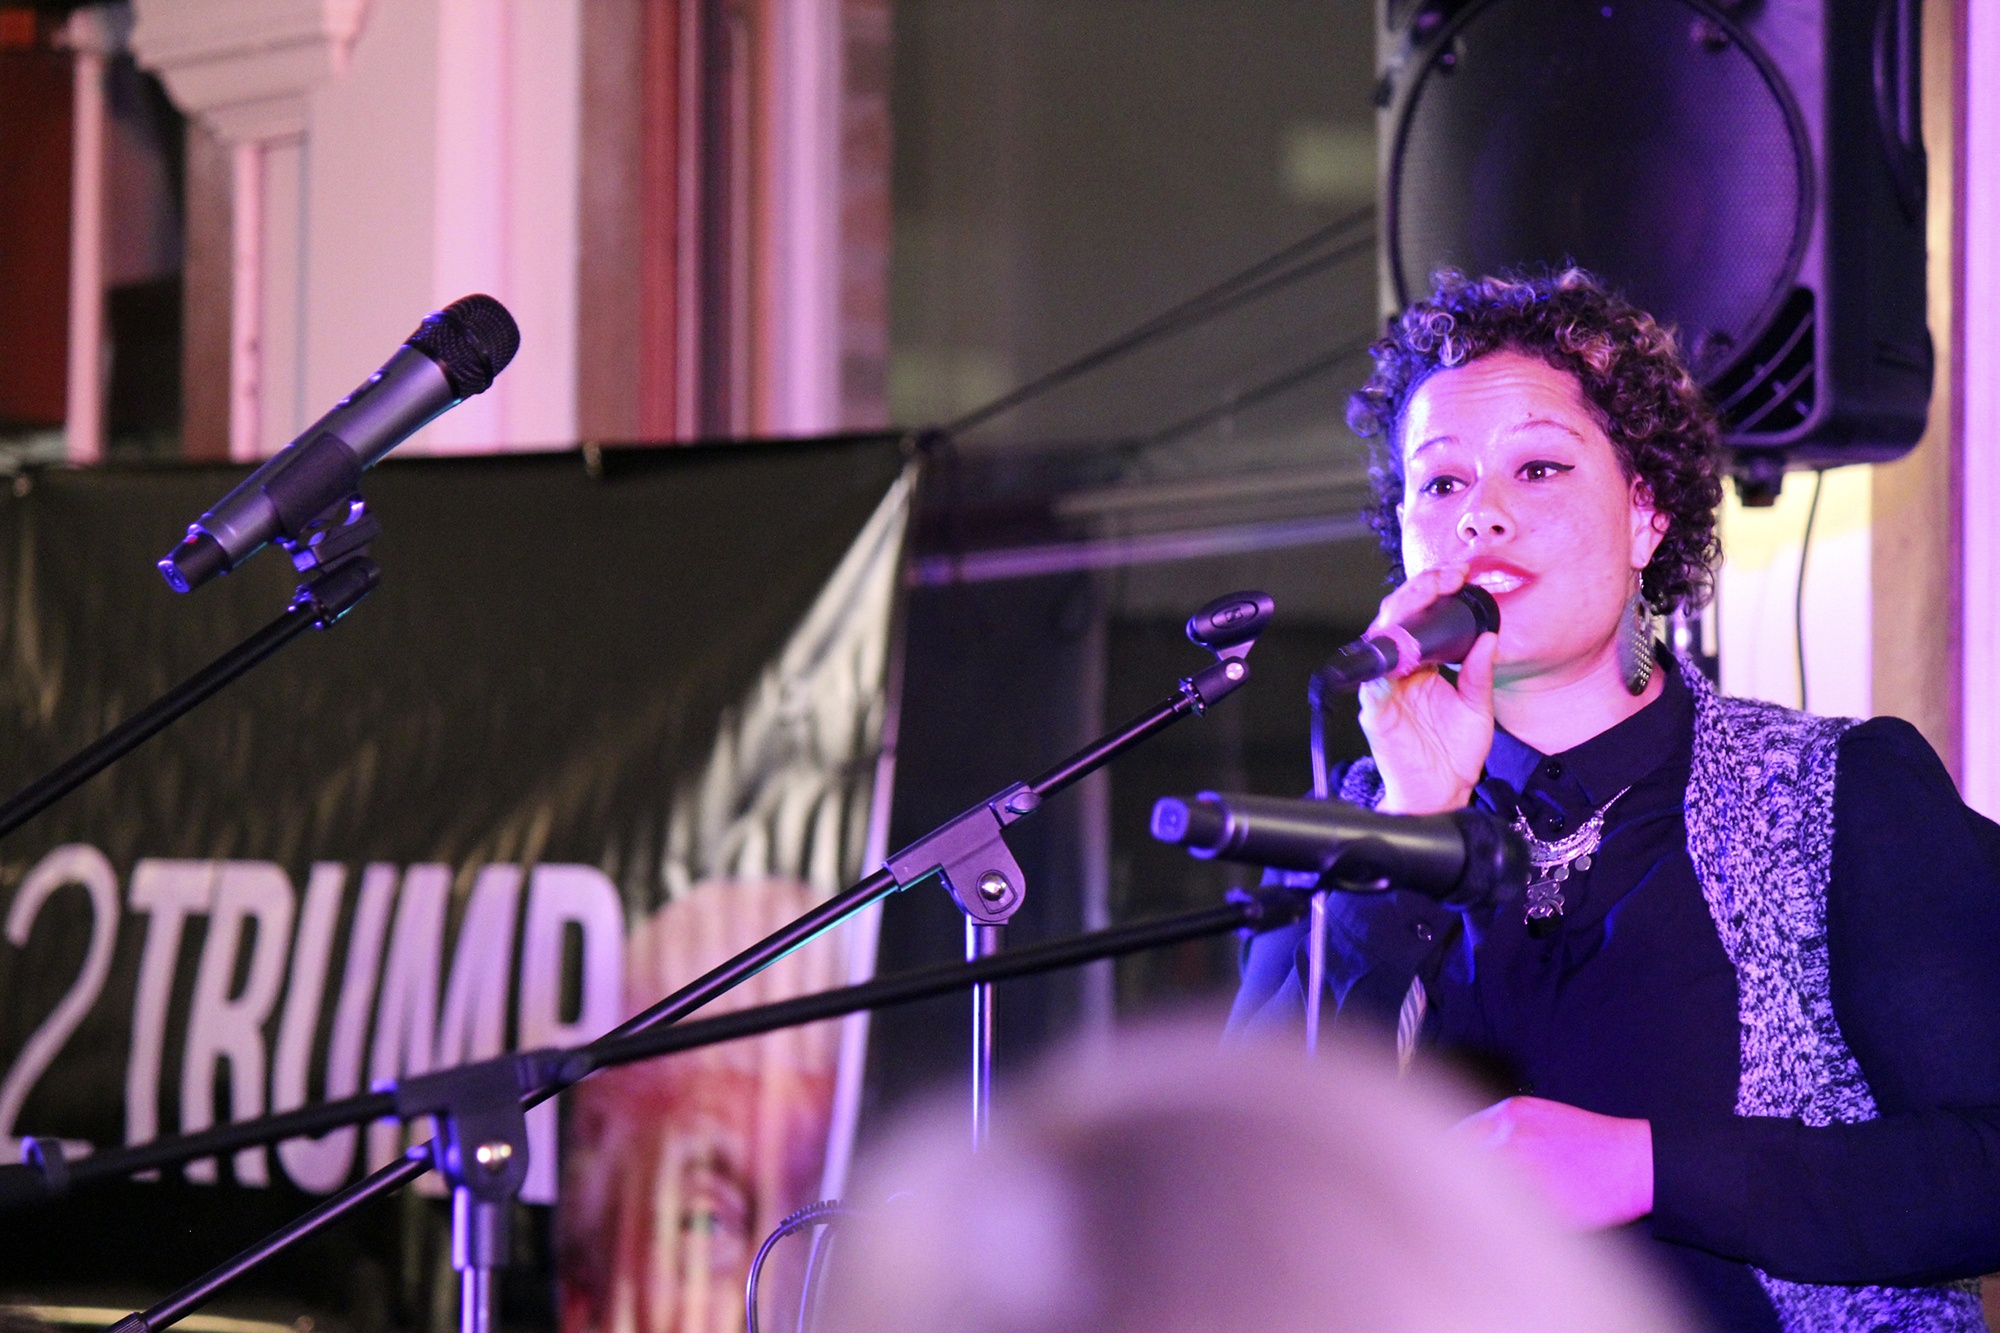 Local activist and artist Nikkita Oliver sings at the #Earth2Trump event in Seattle. Photo by Sara Bernard.